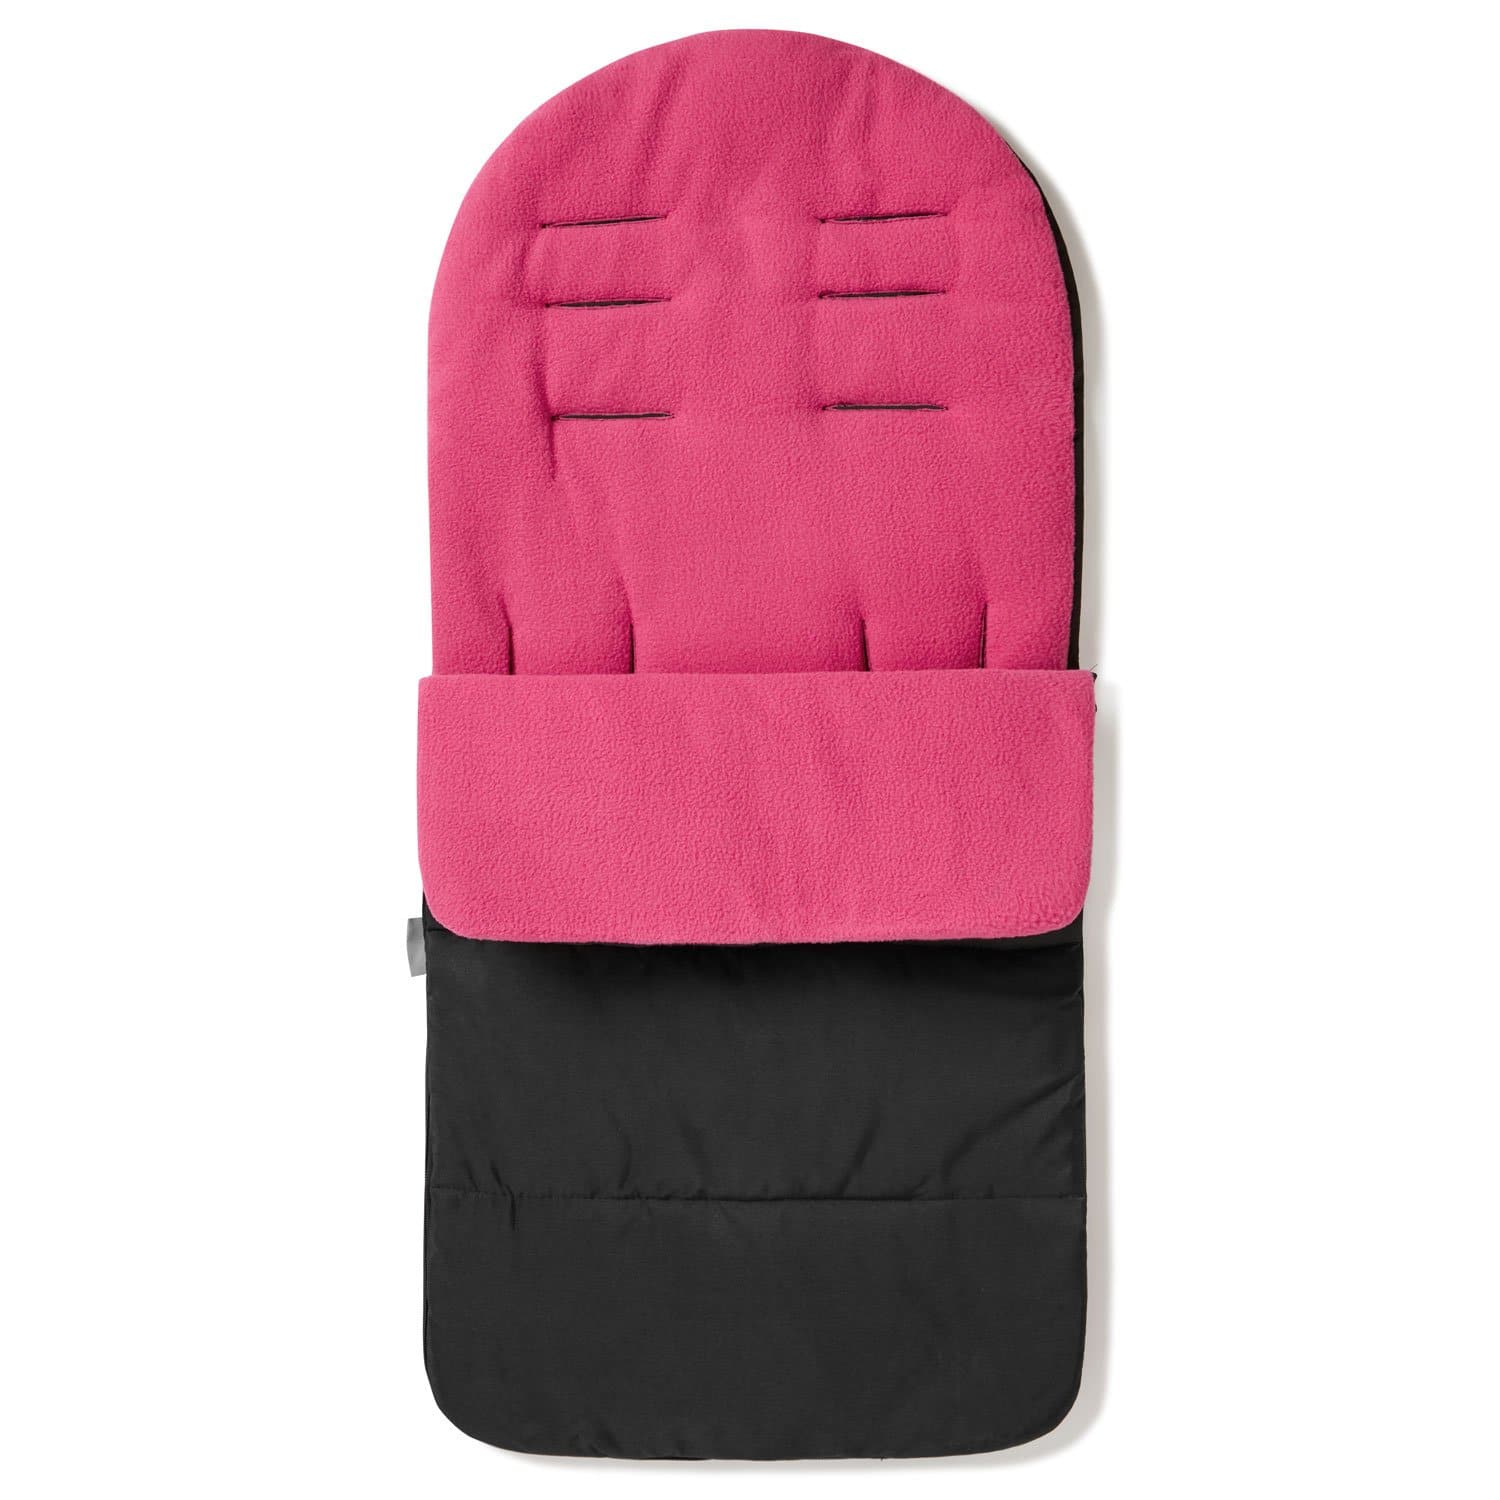 Premium Footmuff / Cosy Toes Compatible with BabySun - Pink Rose / Fits All Models | For Your Little One